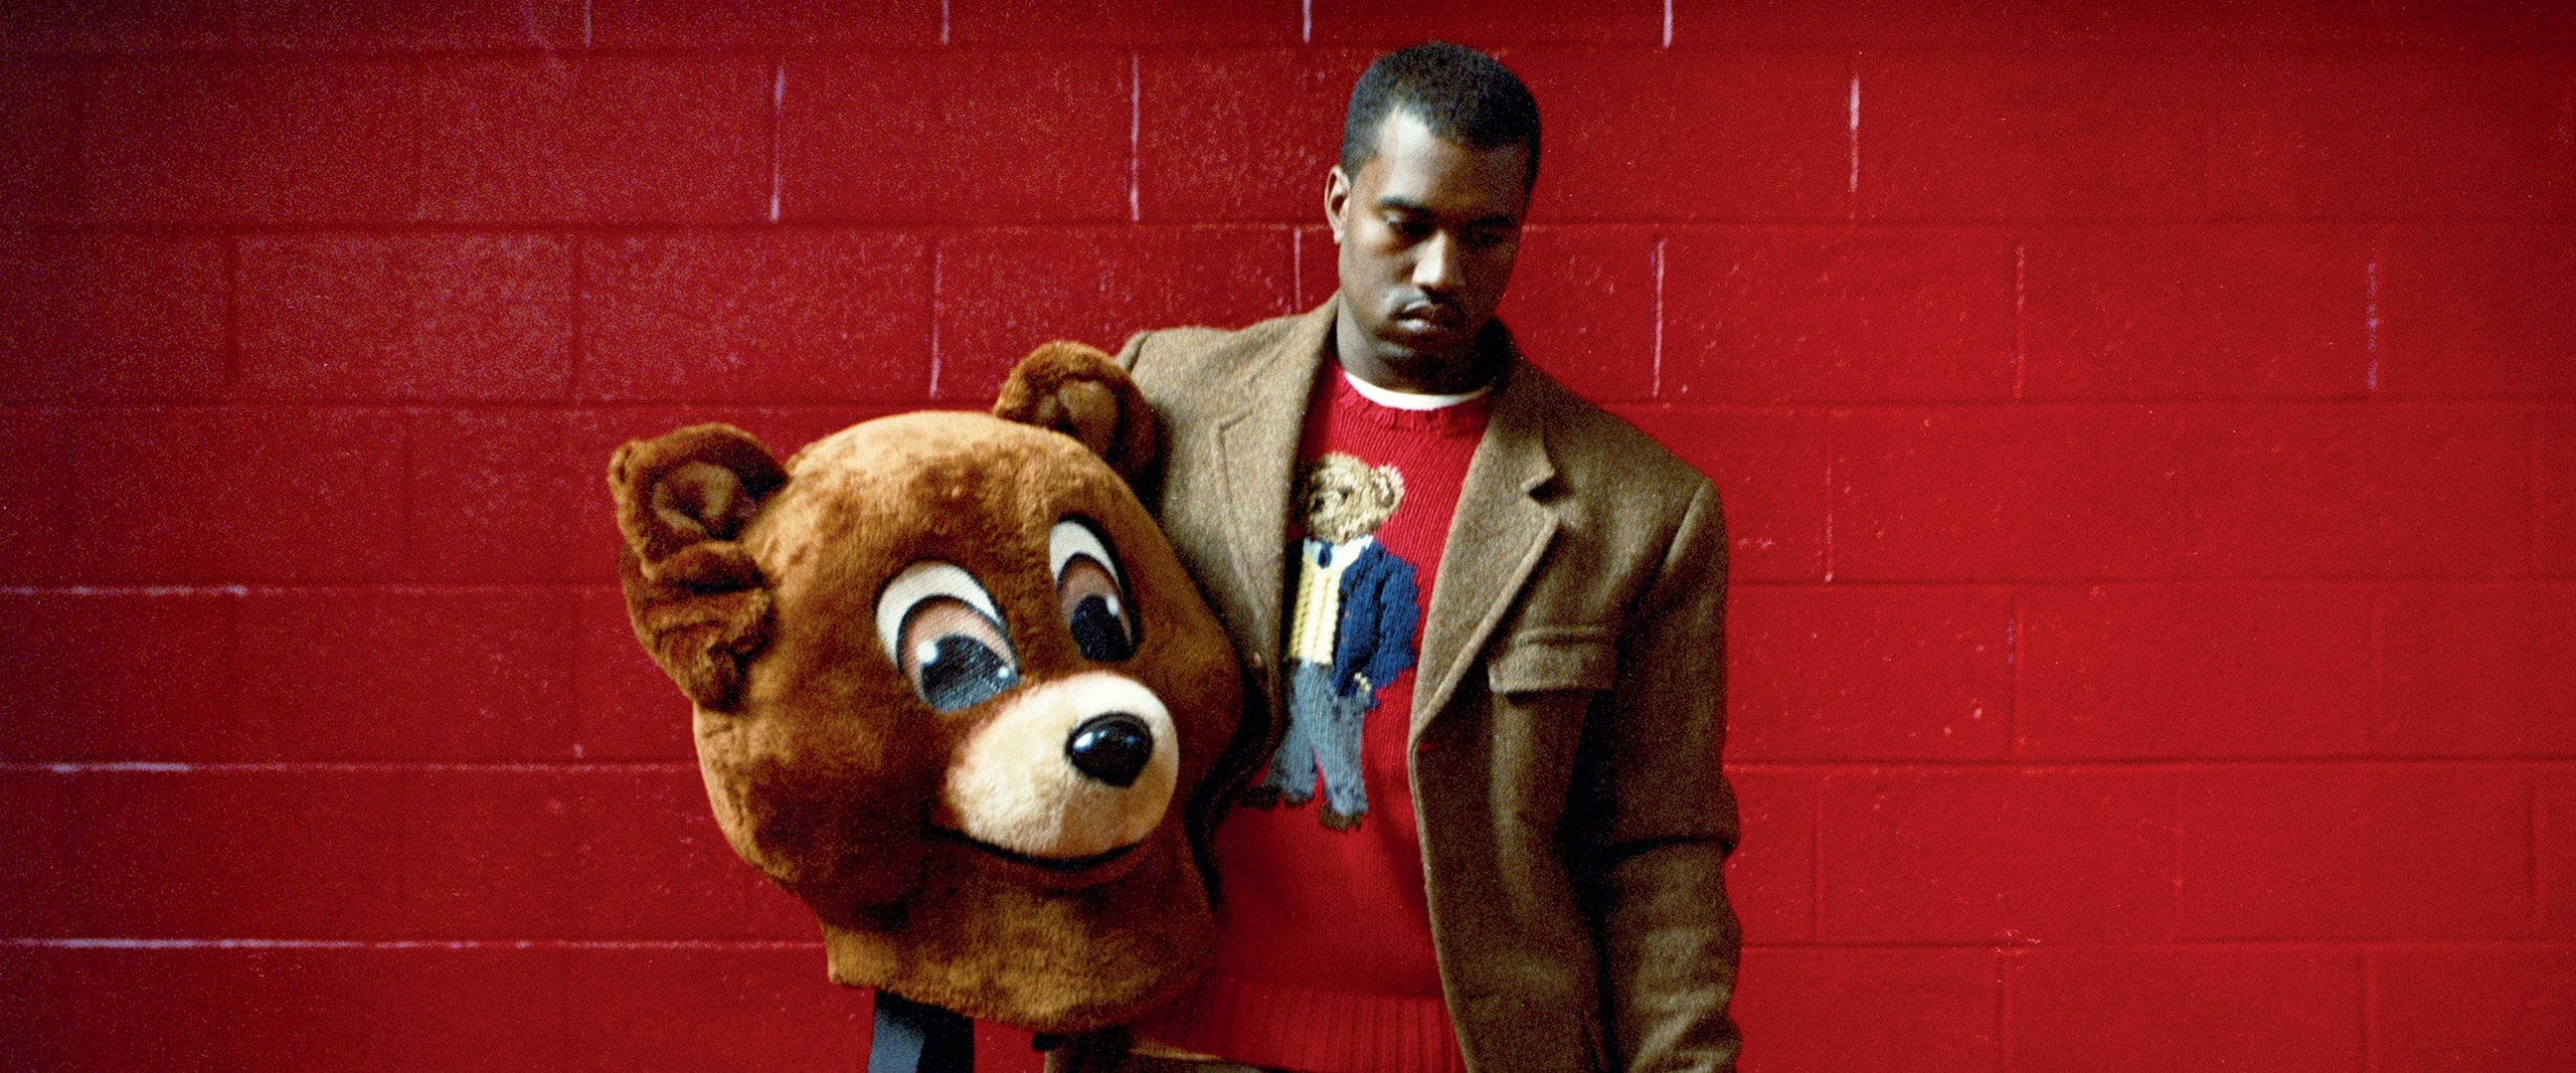 The Making of Kanye West's The College Dropout